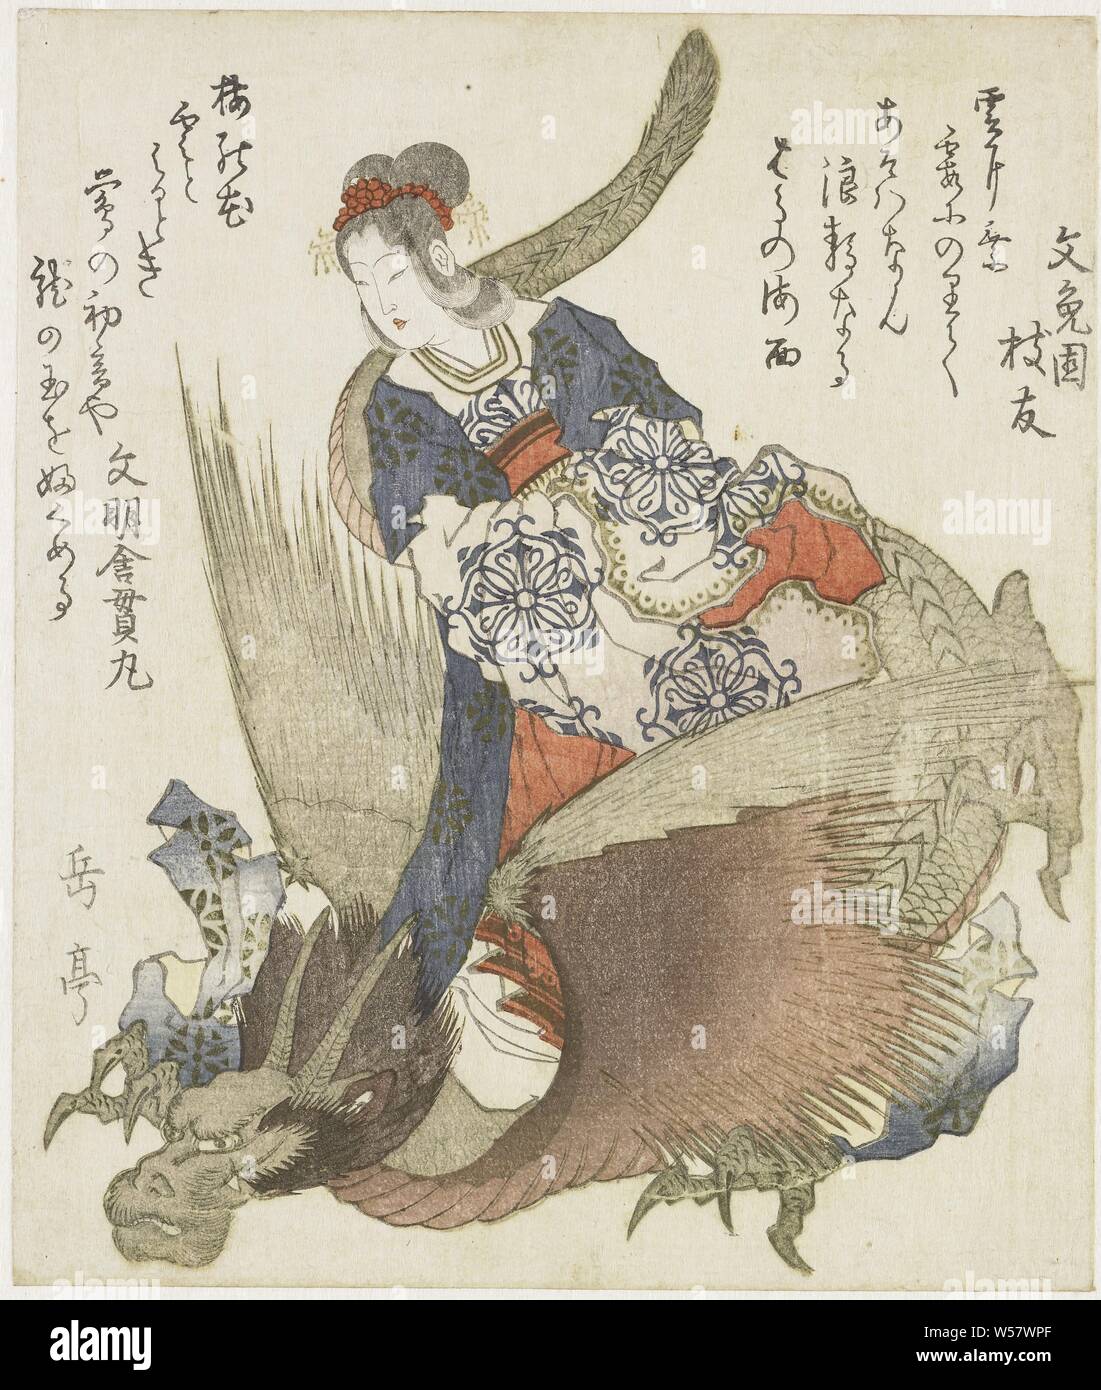 Woman with dragon, A woman in Chinese costume on a dragon. The woman could be the goddess Benten or the Chinese goddess of the West, Hsi Wang Mu. With two poems, dragon, Yashima Gakutei (mentioned on object), Japan, 1820, paper, colour woodcut, h 240 mm × w 173 mm Stock Photo